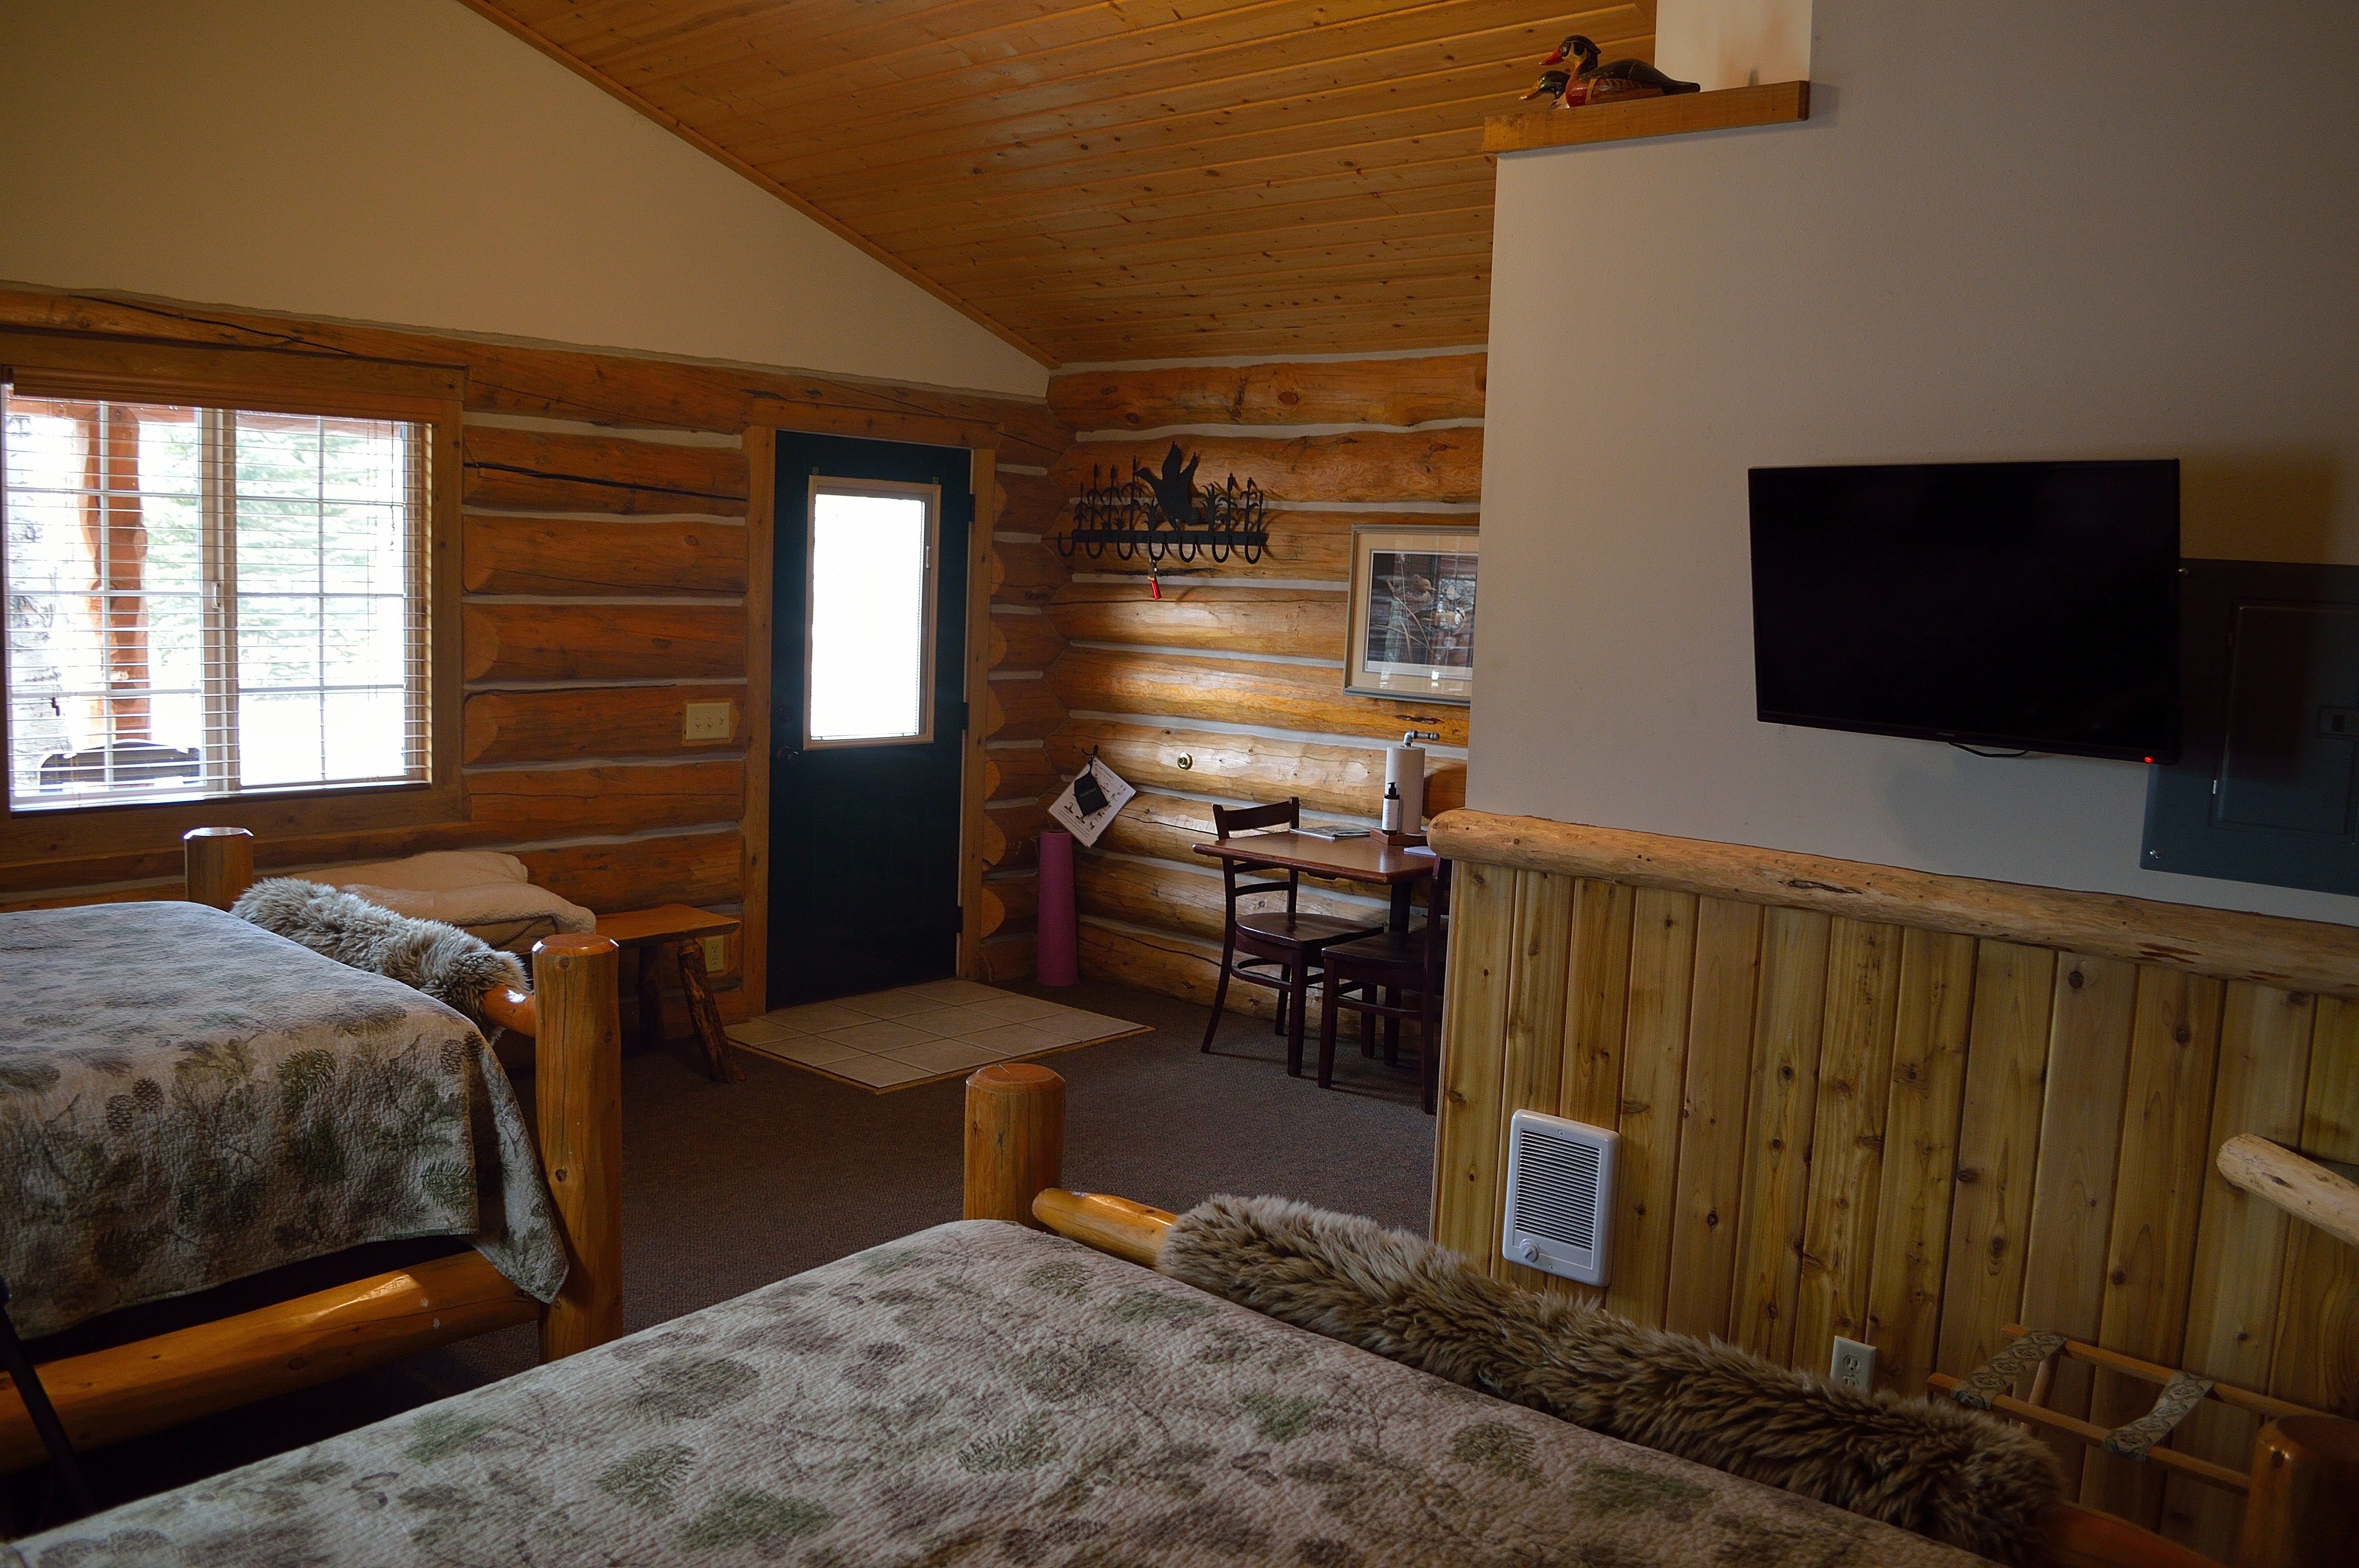 Camper submitted image from Aspen Grove Inn at Heise Bridge - 1